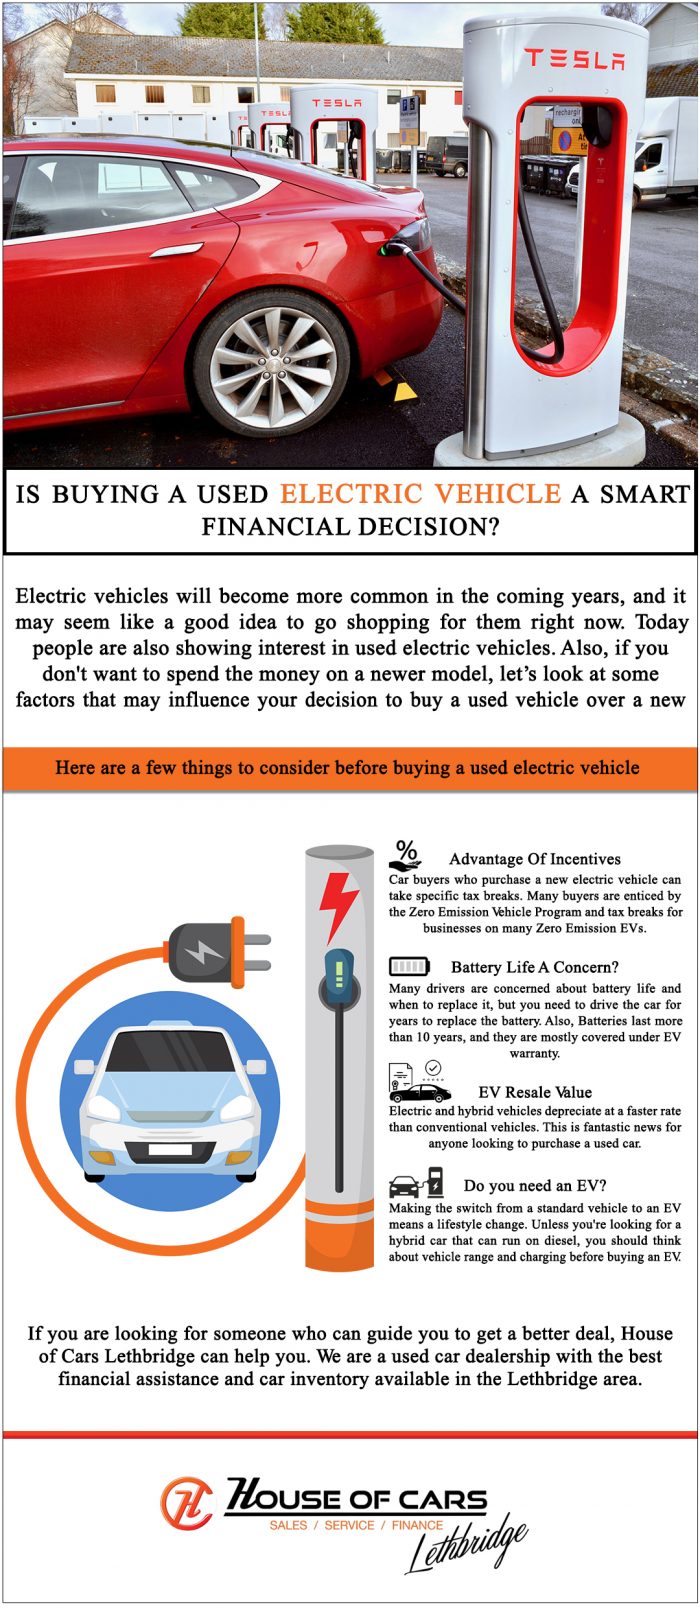 Is Buying a Used Electric Vehicle A Smart Financial Decision?